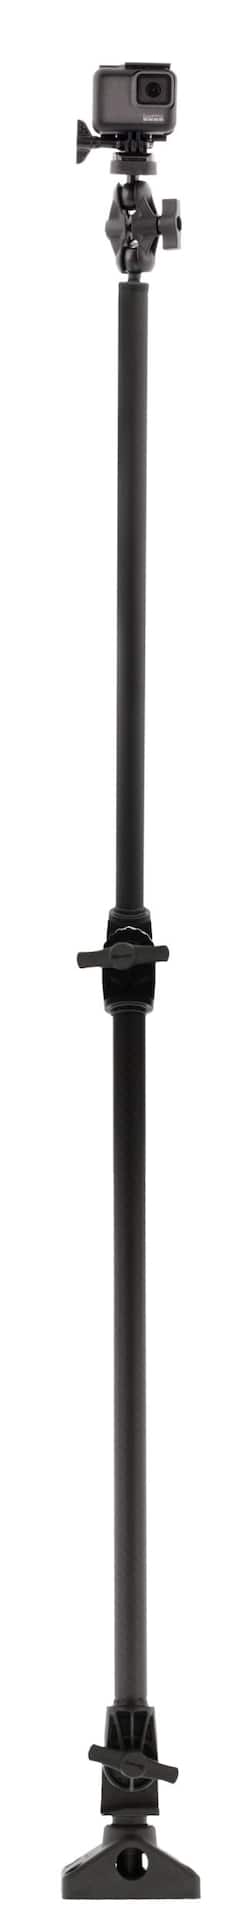 Scotty Floating Camera Boom with Ball Joint & 241 Mount, Great for Kayak  Fishing